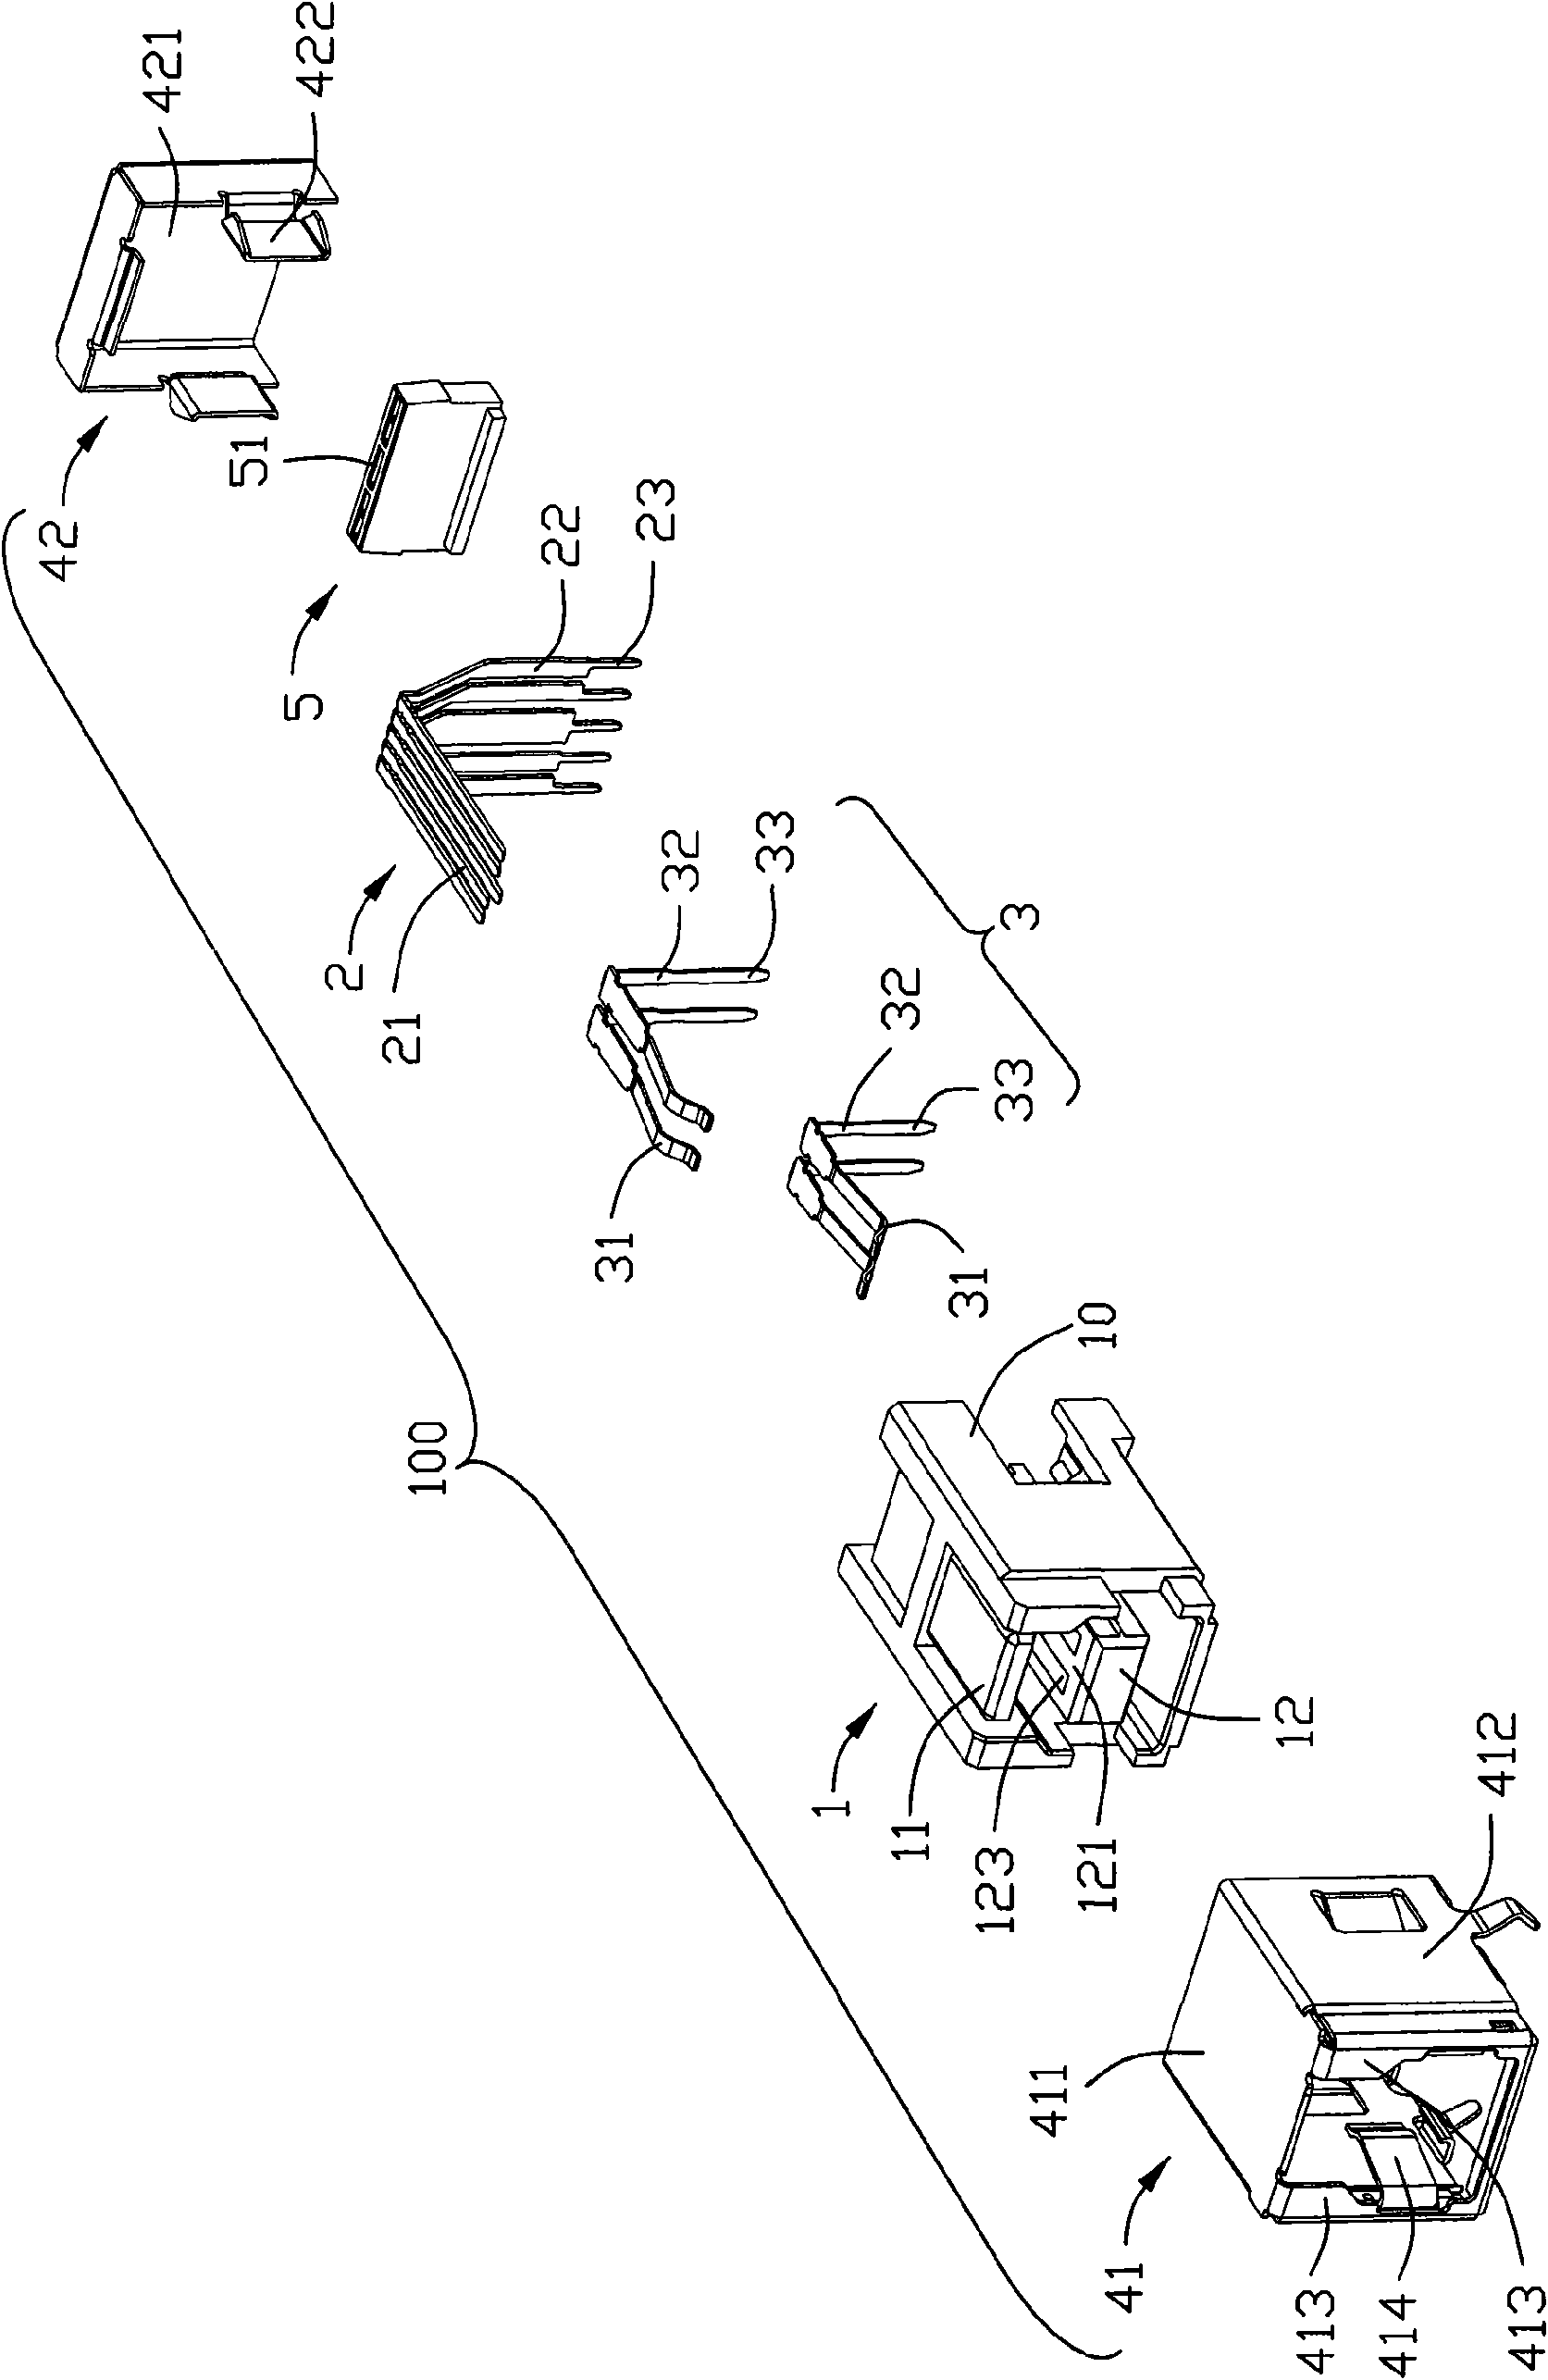 Electrical socket connector, electrical plug connect and components thereof